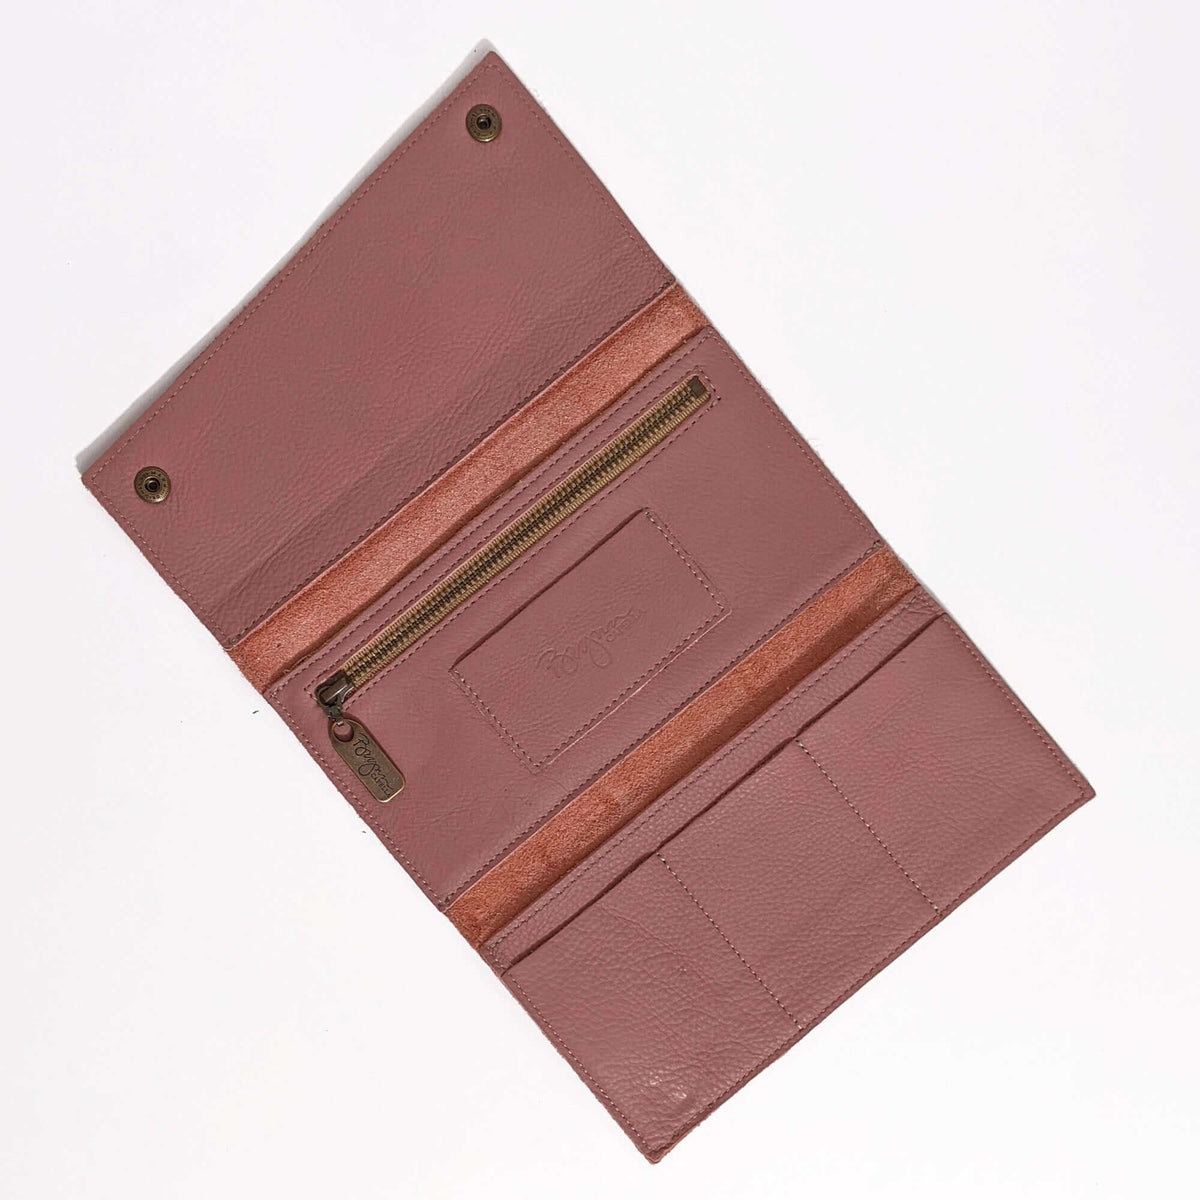 Leather Tri-fold wallet, mauve, Brynn Capella, made in USA leather goods